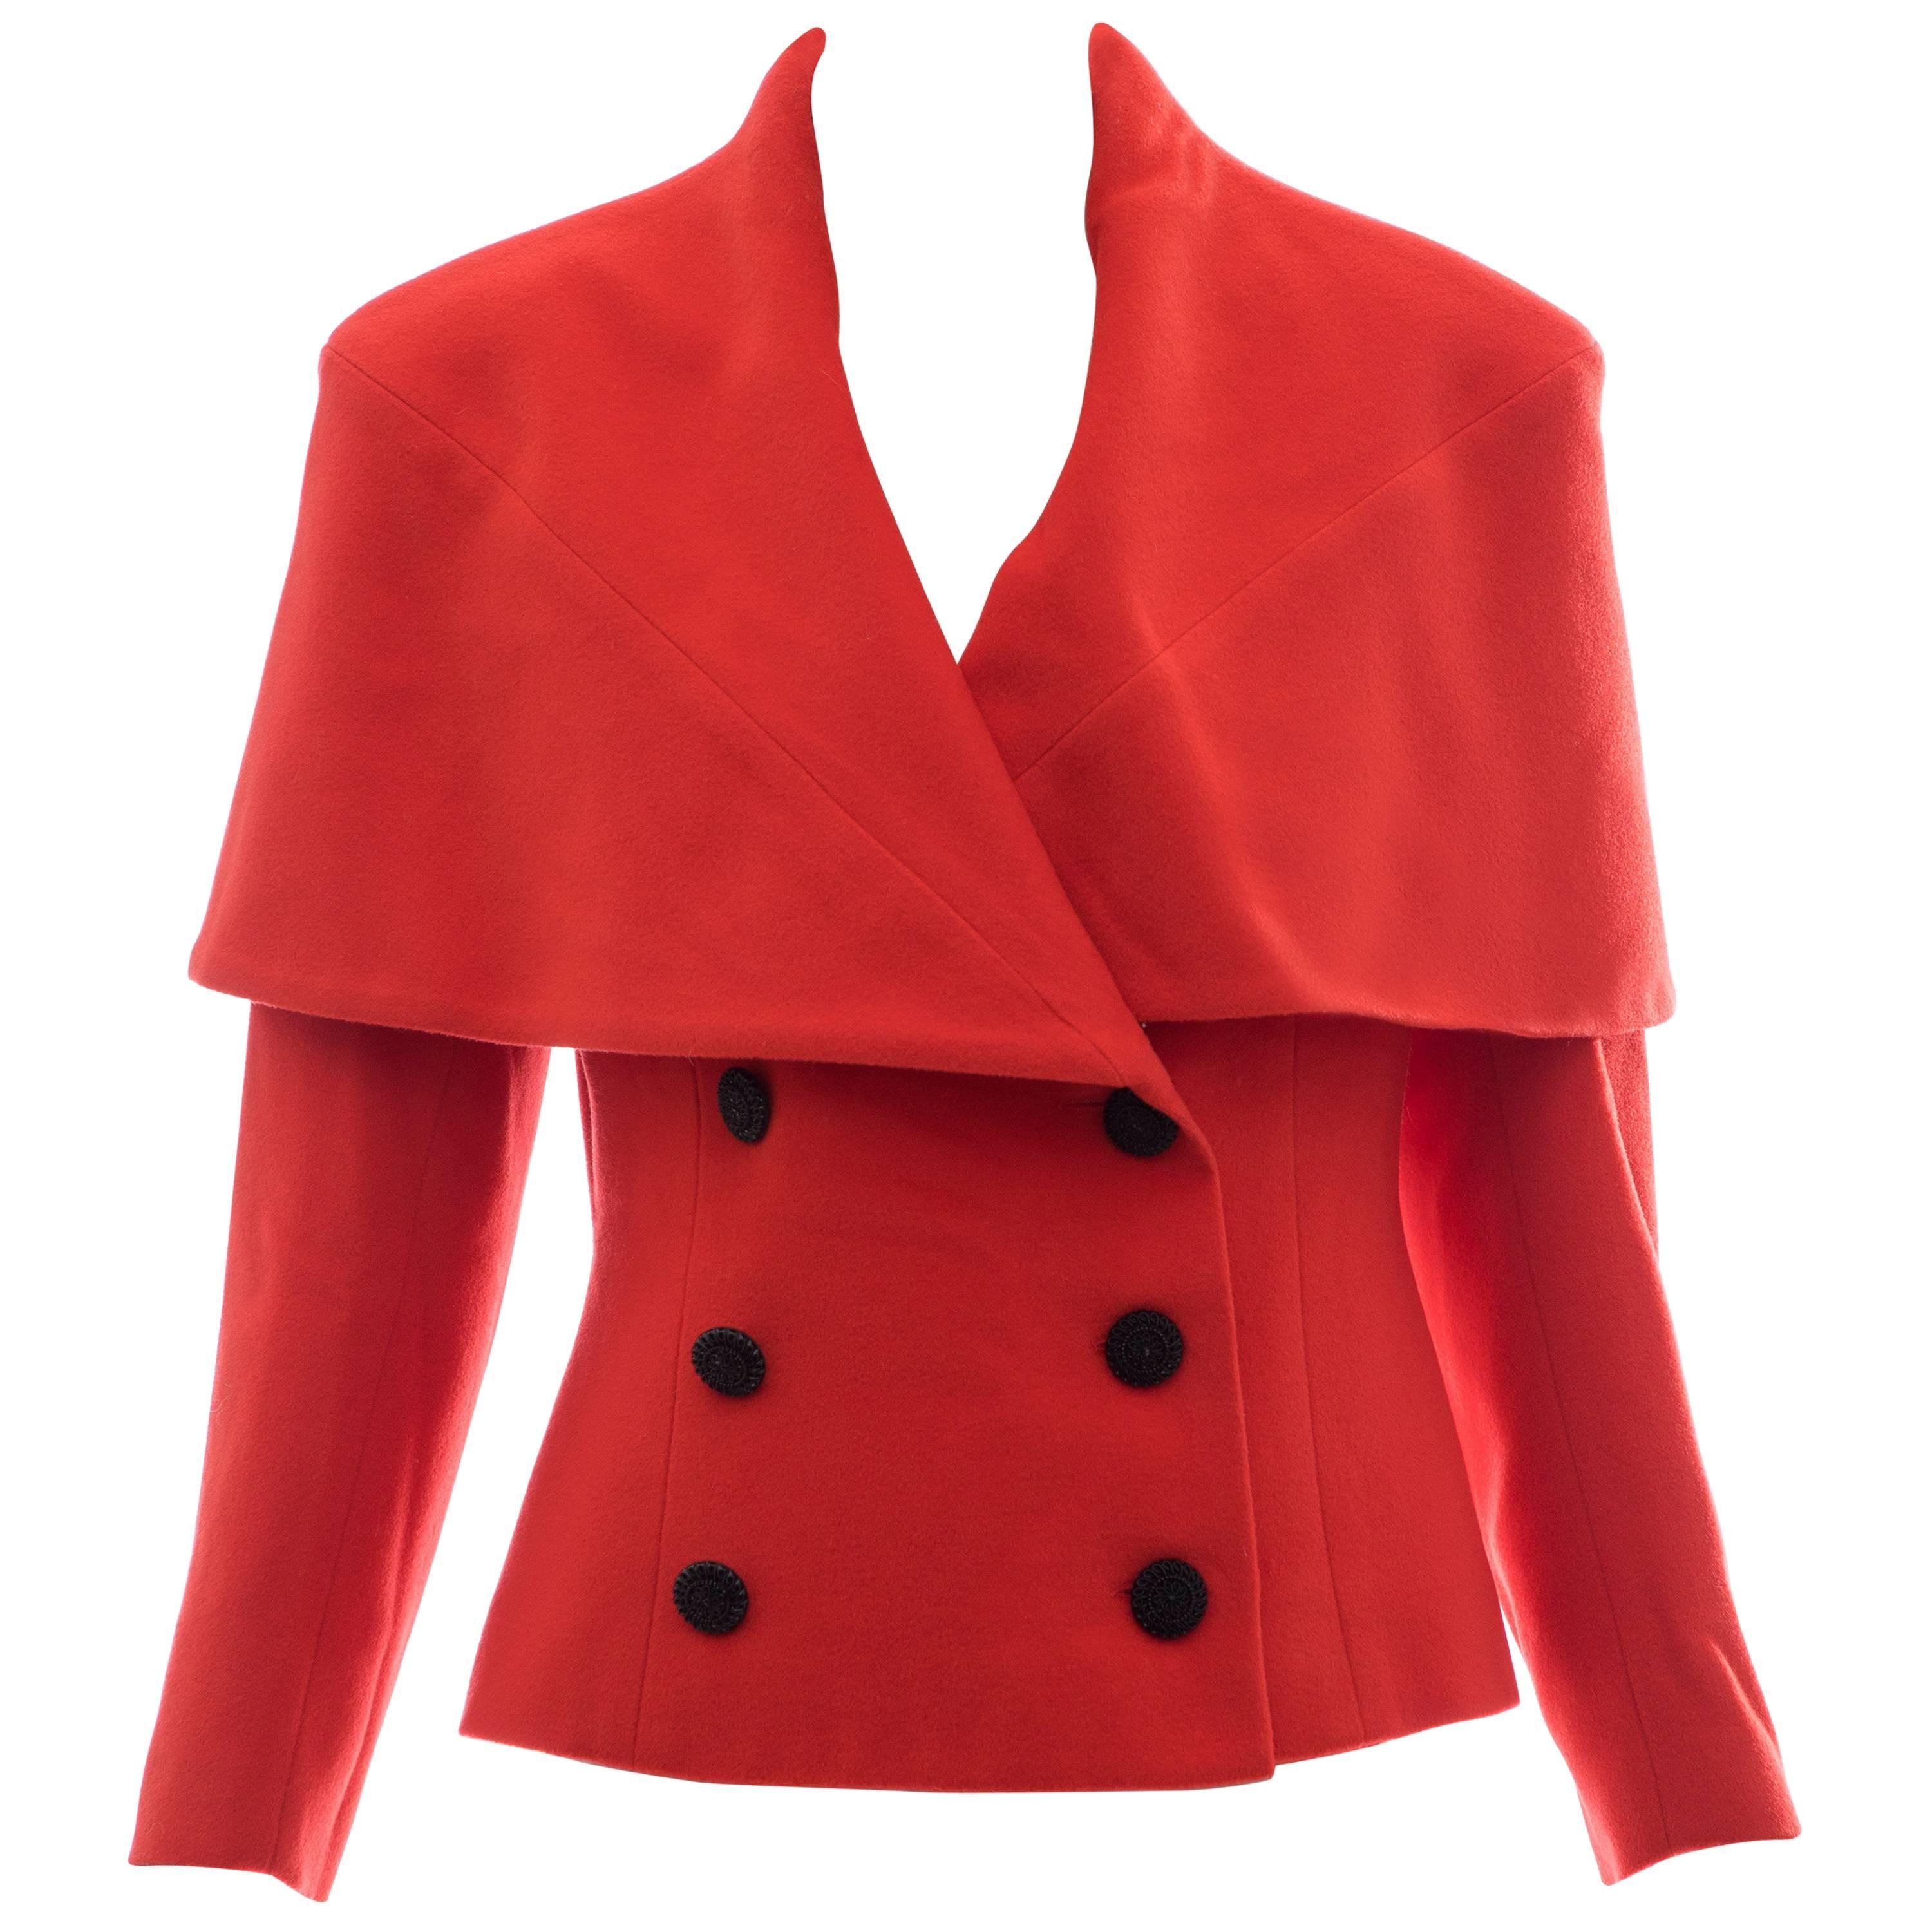 Karl Lagerfeld For Chloe Paprika Wool Shawl Collar Jacket, Circa 1980's For Sale